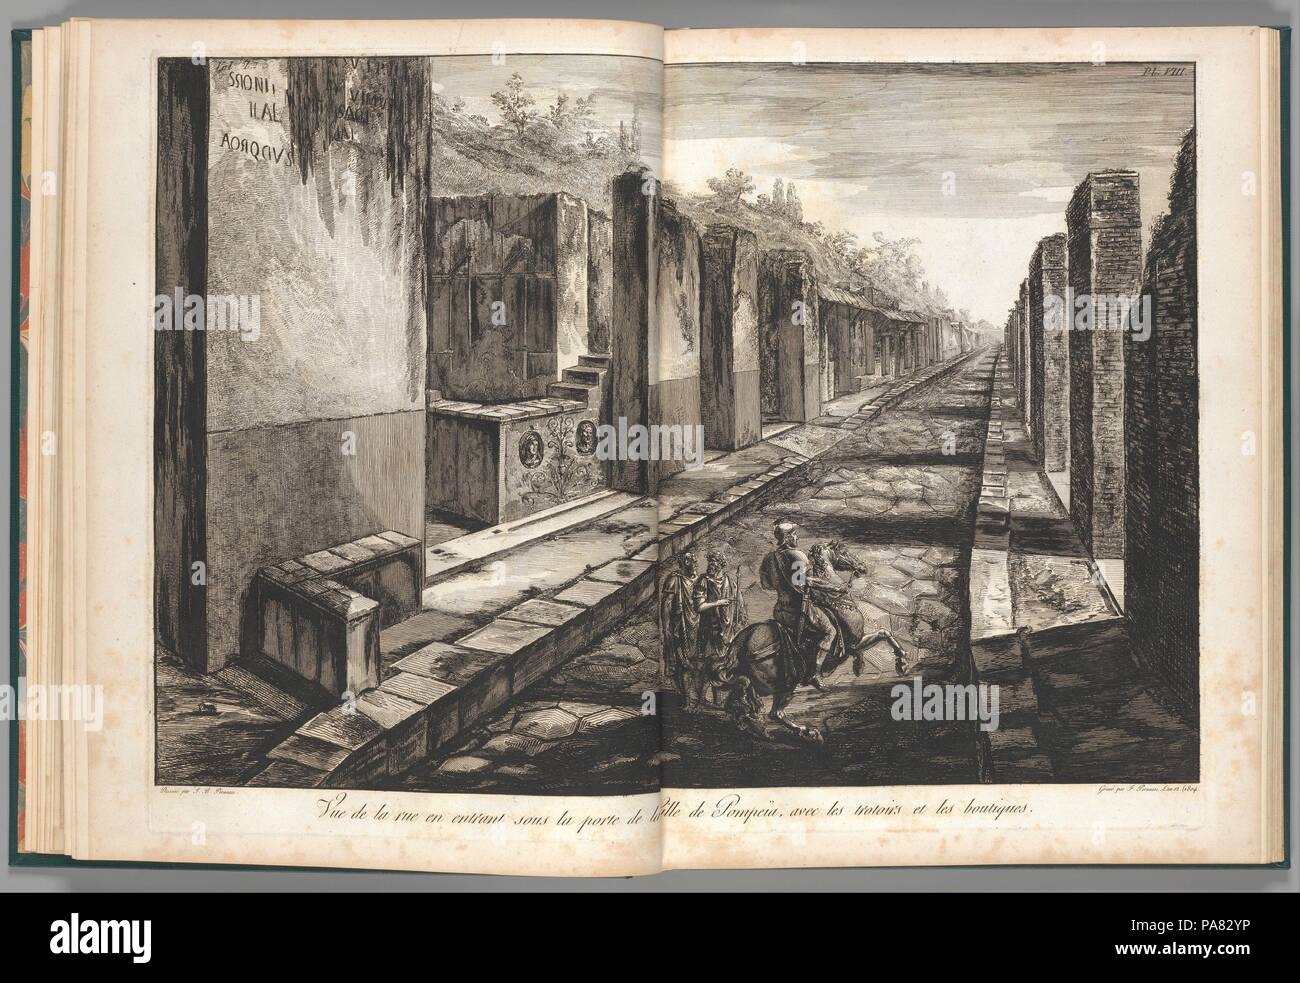 View from the street entering beneath the gateway to the city of Pompeii, with the foot paths and the shops, from Antiquités de Pompeïa, tome premier, Antiquités de la Grande Grèce... (Antiquities of Pompeii, volume one, Antiquities of Great Greece...), volume 1, plate 8. Artist: Francesco Piranesi (Italian, Rome 1758-1810 Paris); After Giovanni Battista Piranesi (Italian, Mogliano Veneto 1720-1778 Rome). Dimensions: Sheet: 21 7/8 x 31 9/16 in. (55.5 x 80.2 cm)  Plate: 20 1/16 x 28 3/8 in. (51 x 72 cm). Series/Portfolio: Antiquités de Pompeïa, tome premier, Antiquités de la Grande Grèce, aujou Stock Photo